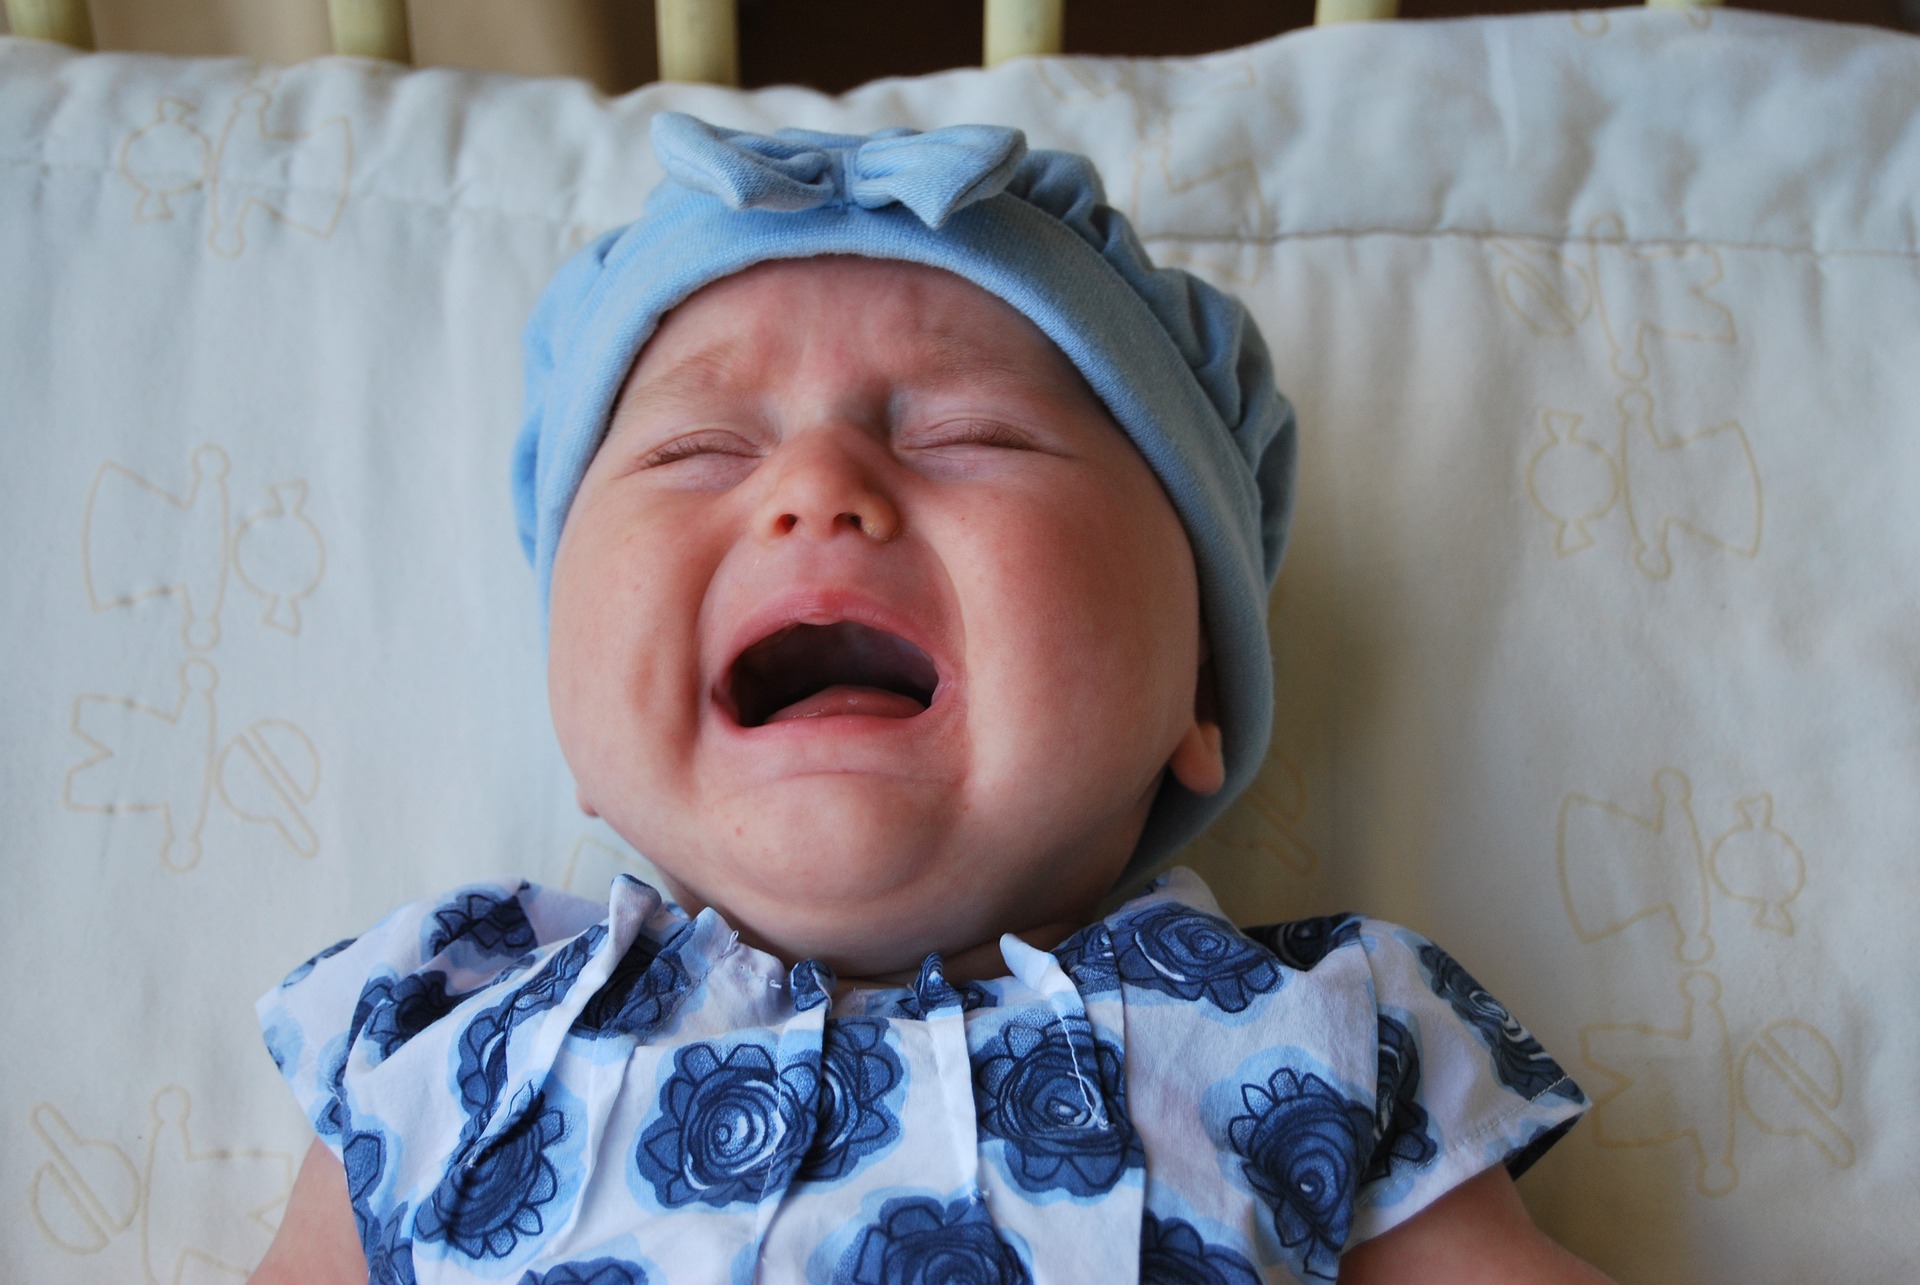 A baby girl crying while lying in a cot | Source: Pixabay